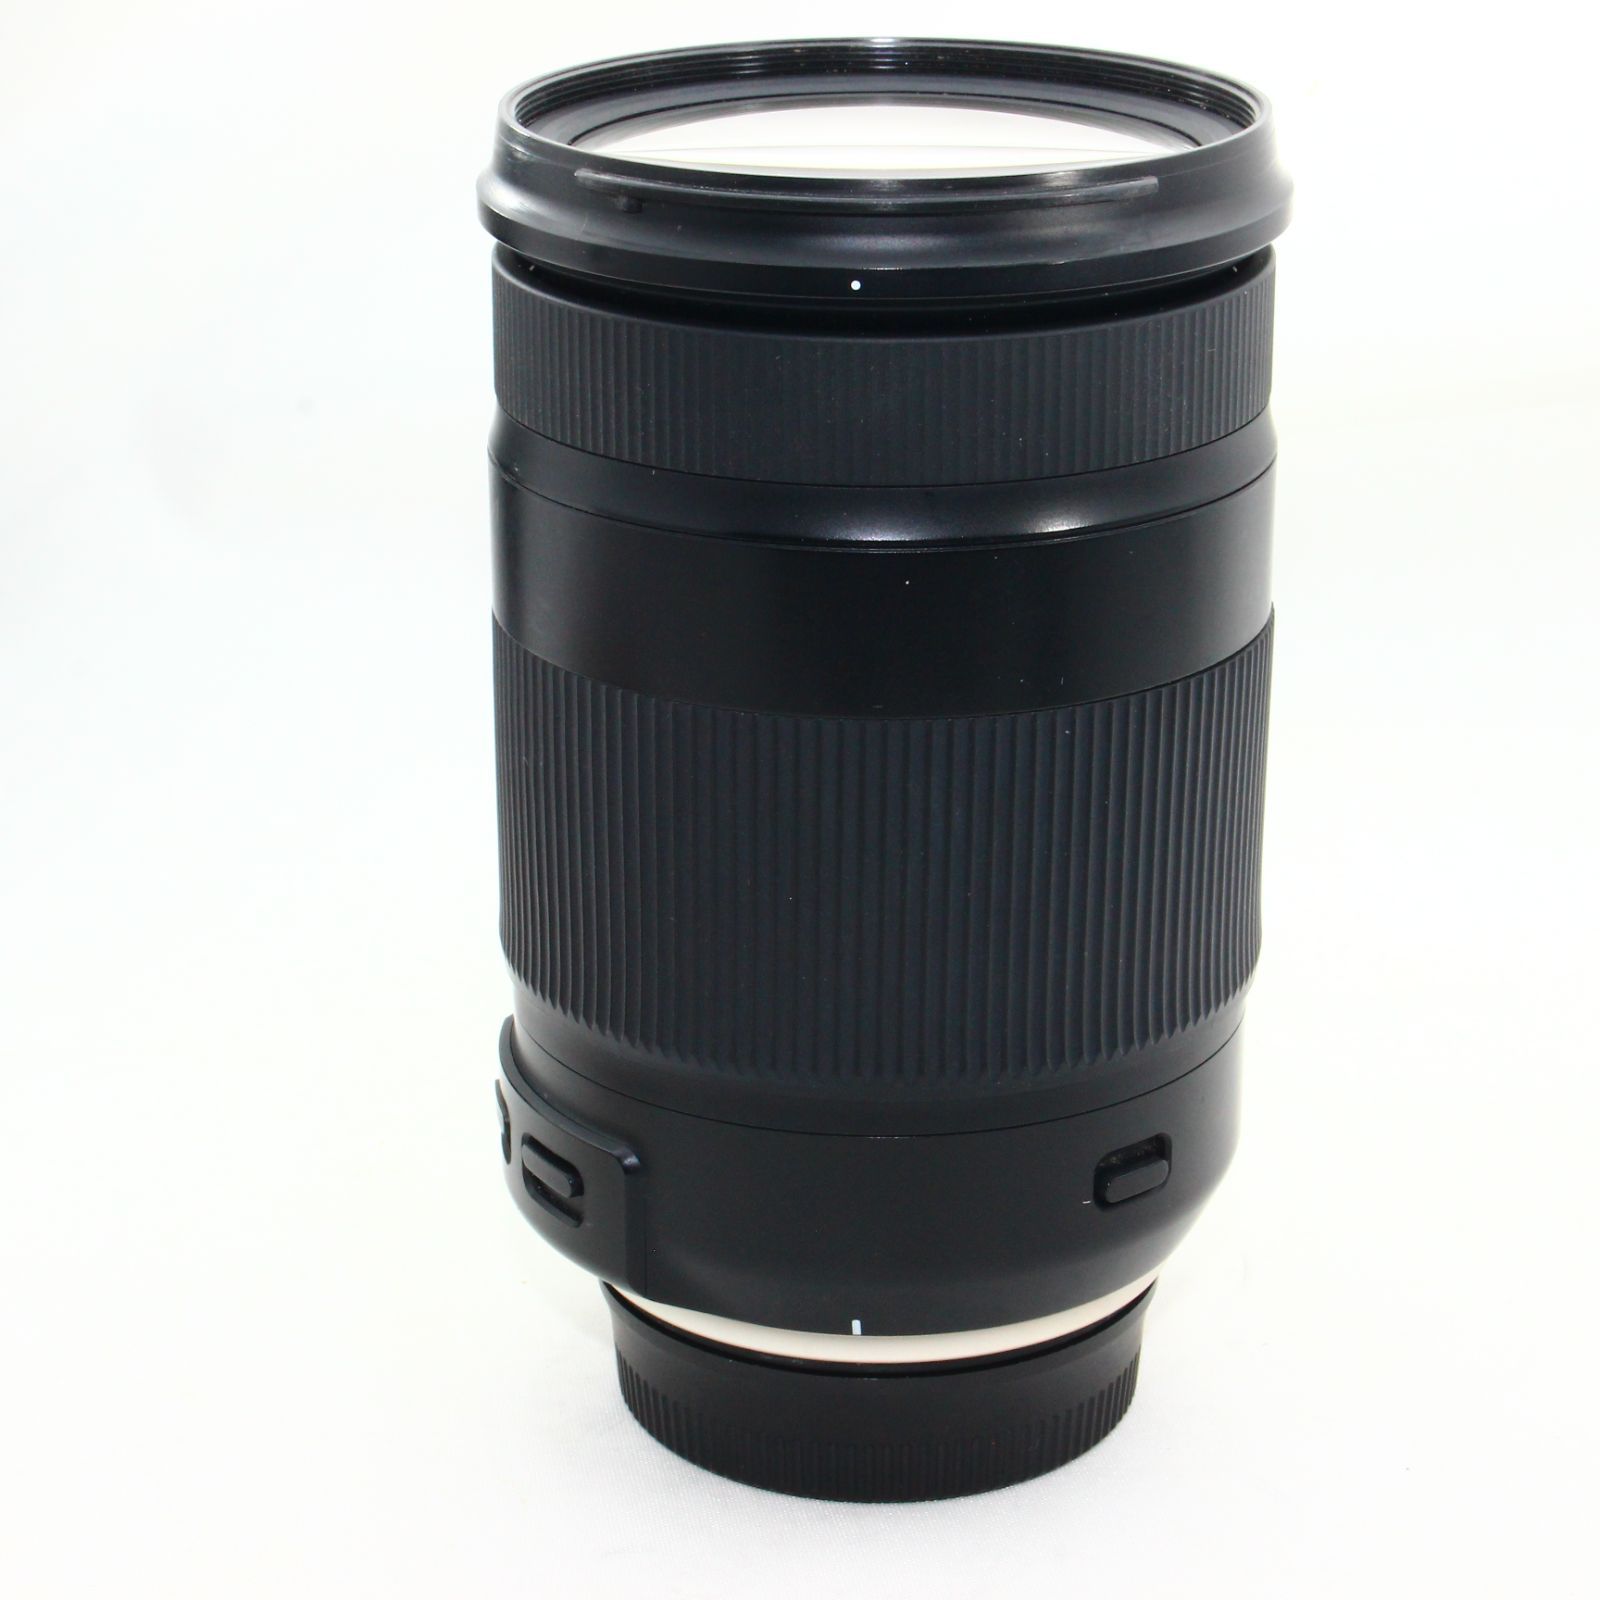 TAMRON 高倍率ズームレンズ 18-400mm F3.5-6.3 DiII VC HLD ニコン用